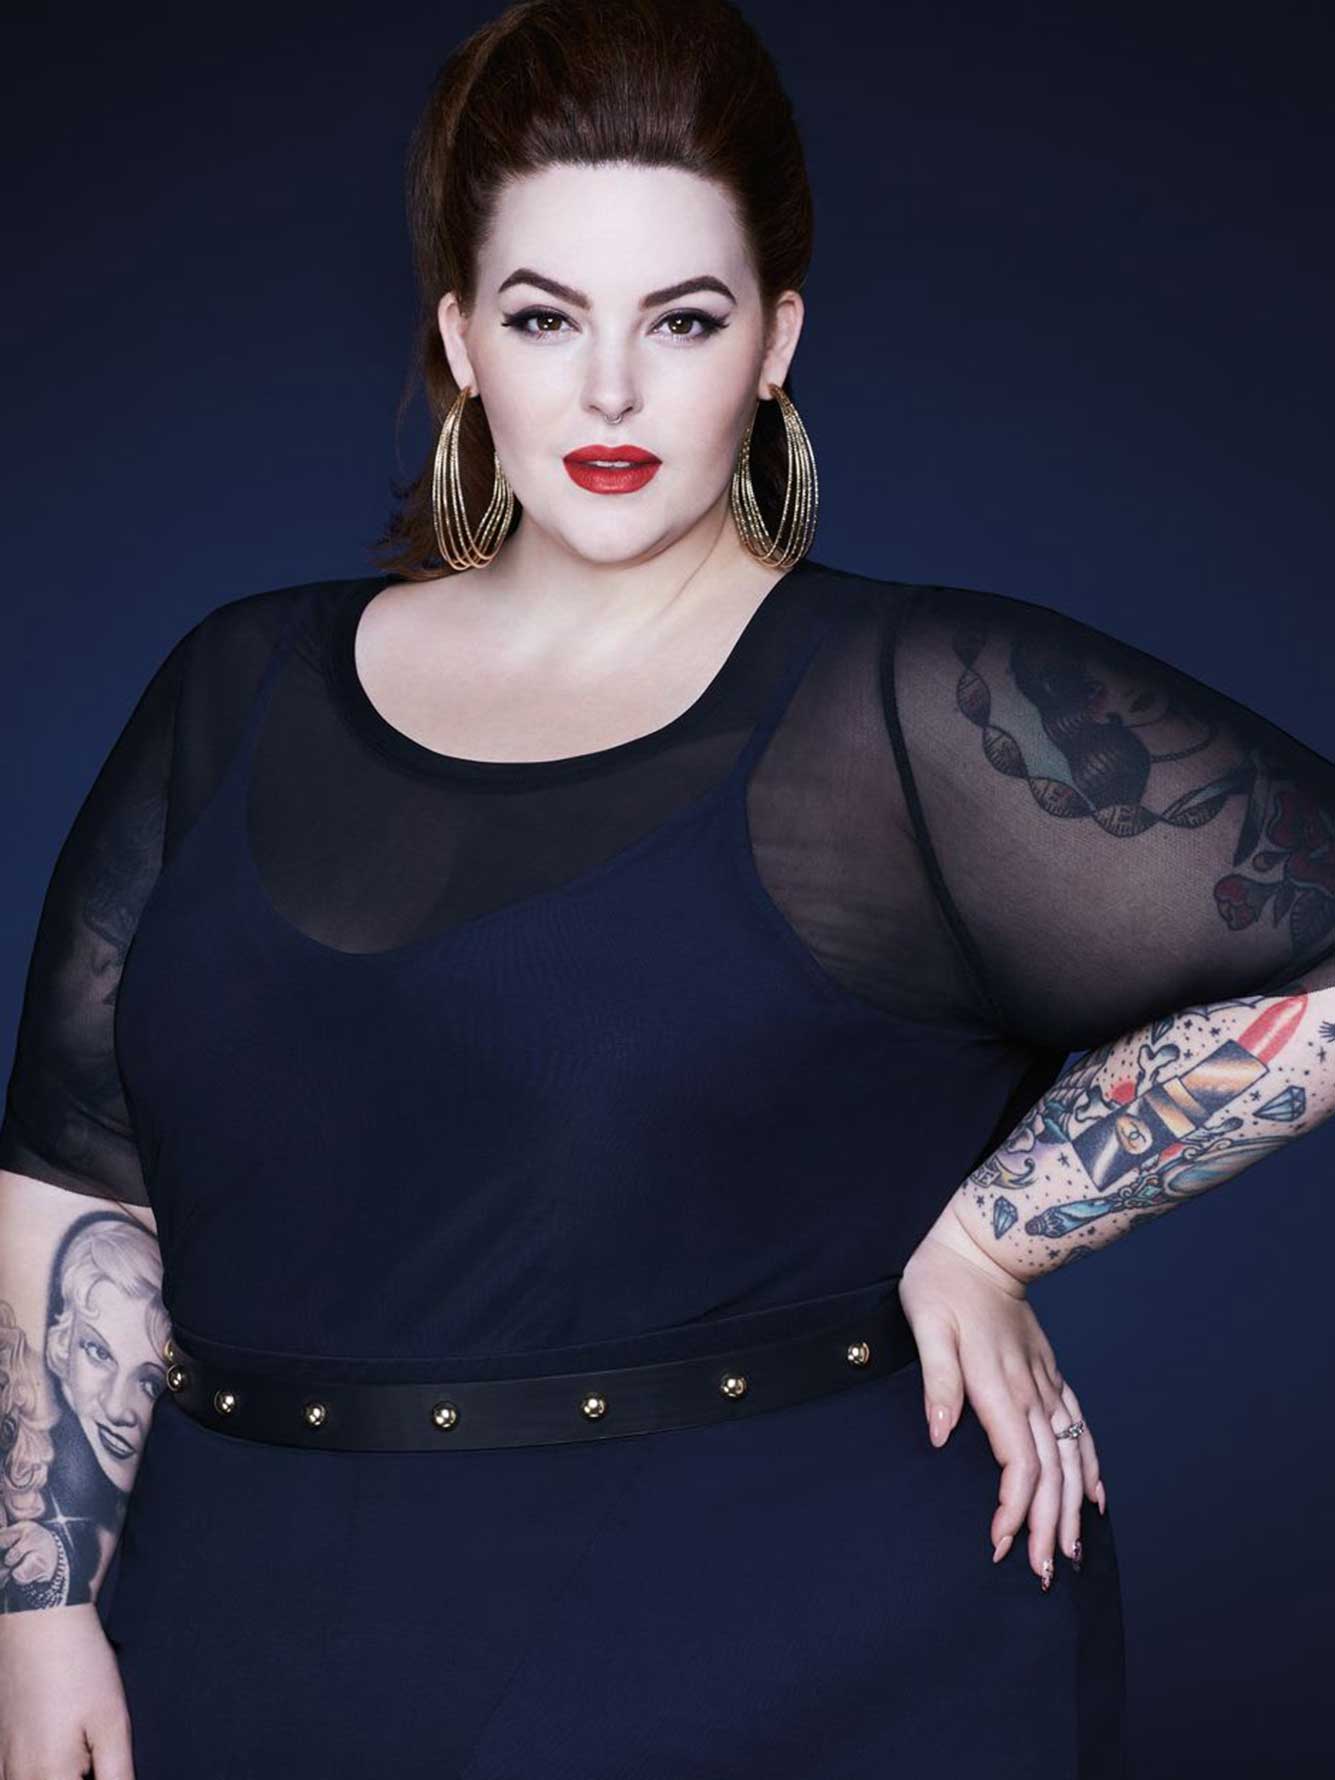 Tess Holliday Picture - Image Abyss